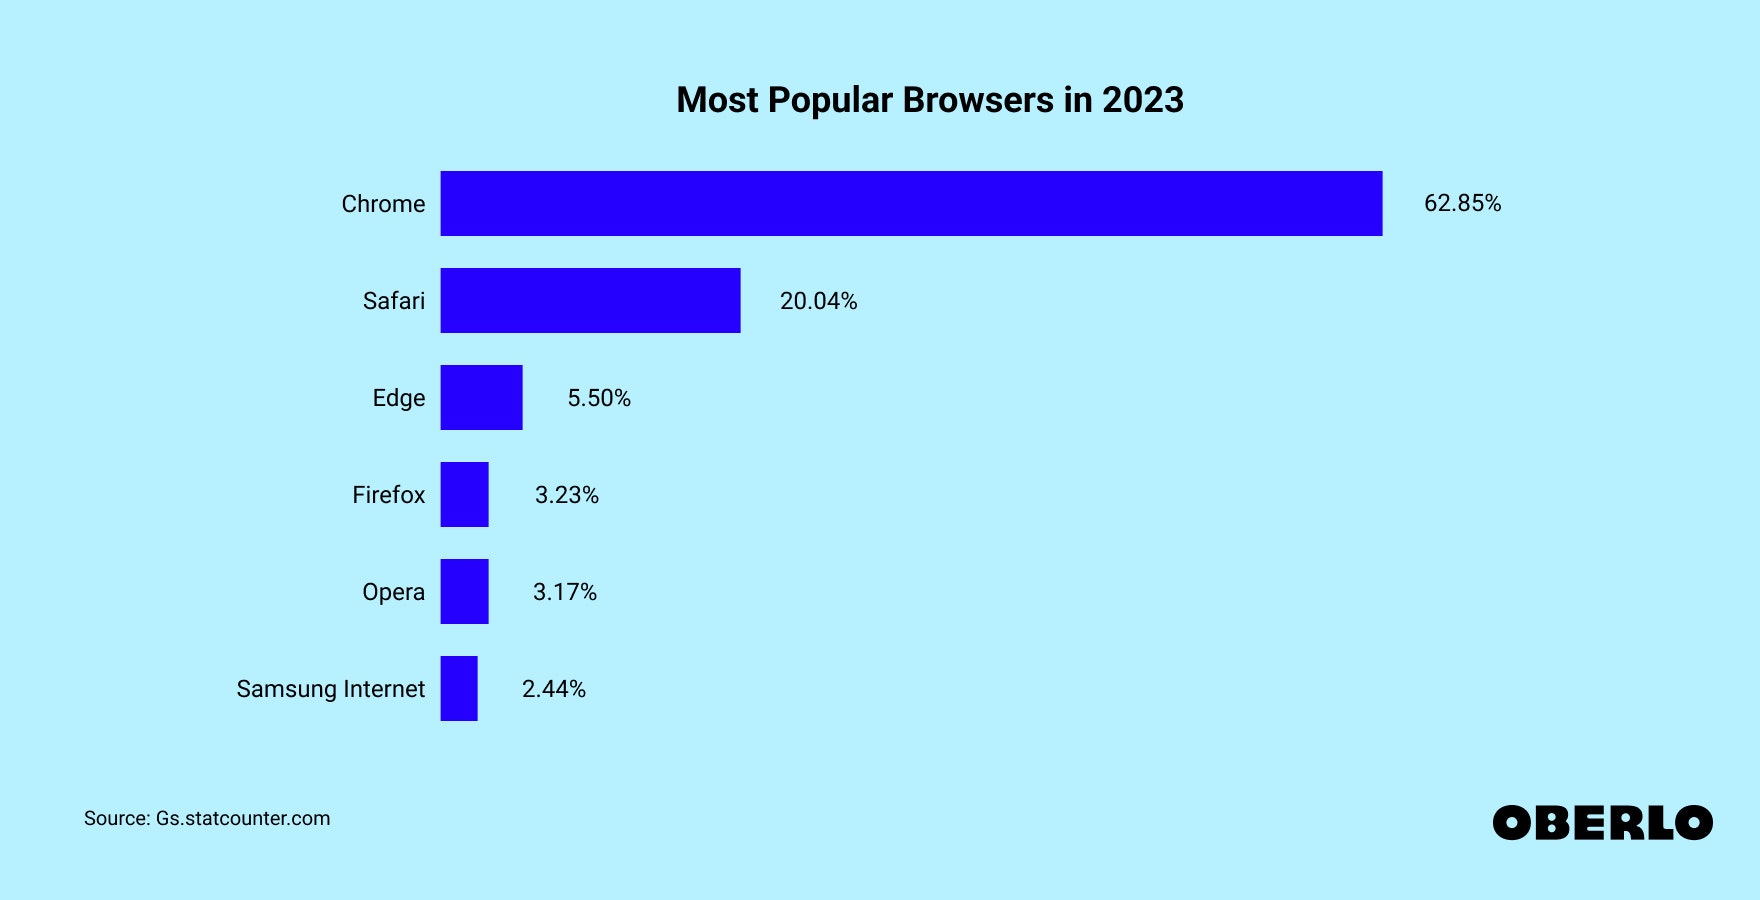 Chart showing the Most Popular Web Browsers in 2023